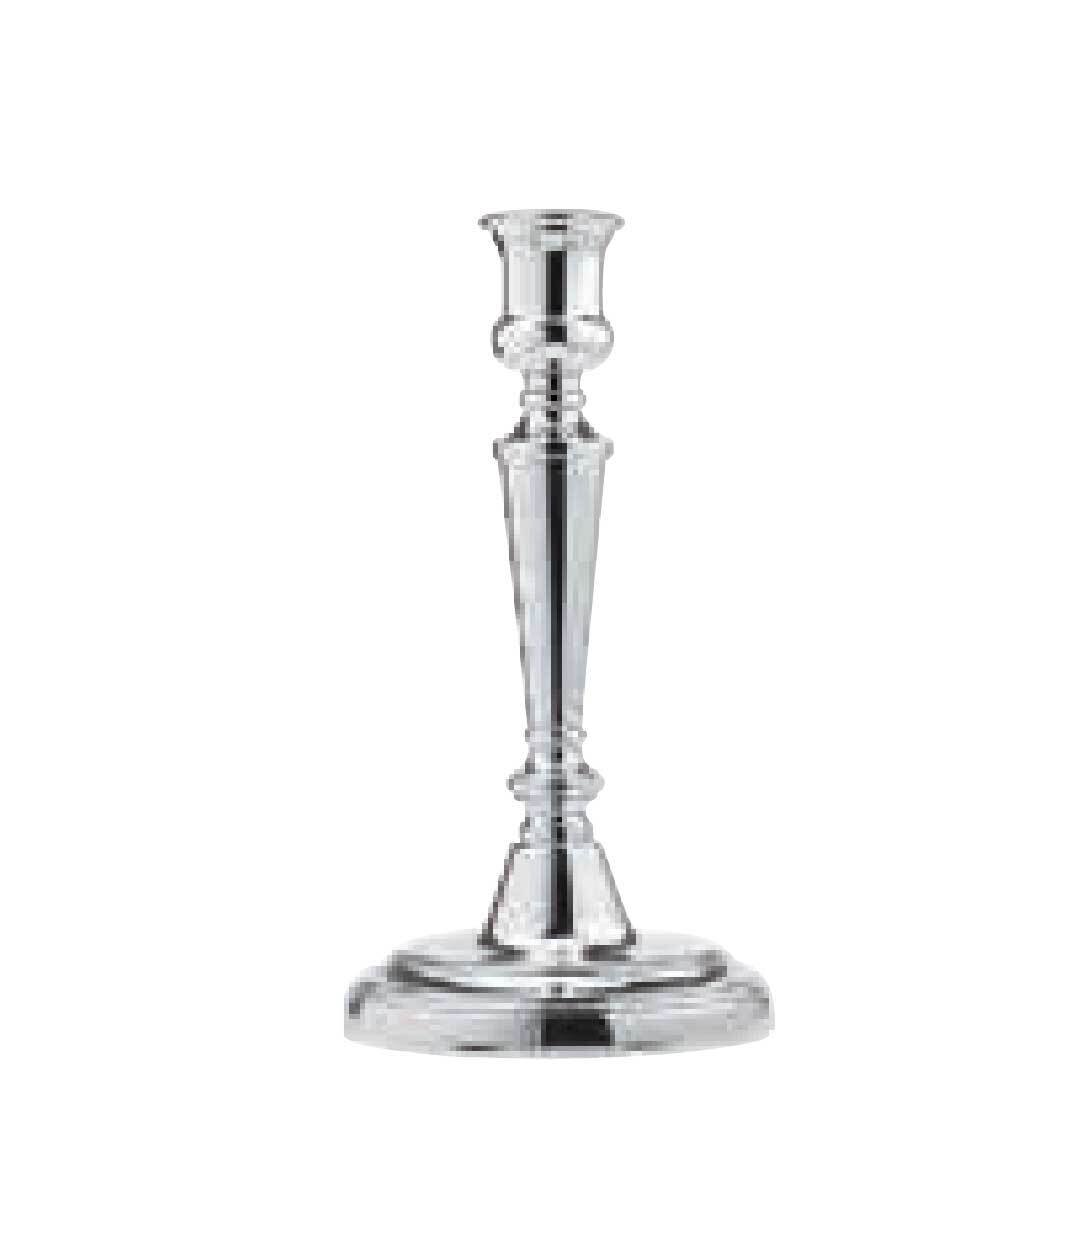 Ercuis Rencontre Candlestick 8.25 Inch Silver Plated F522501-01